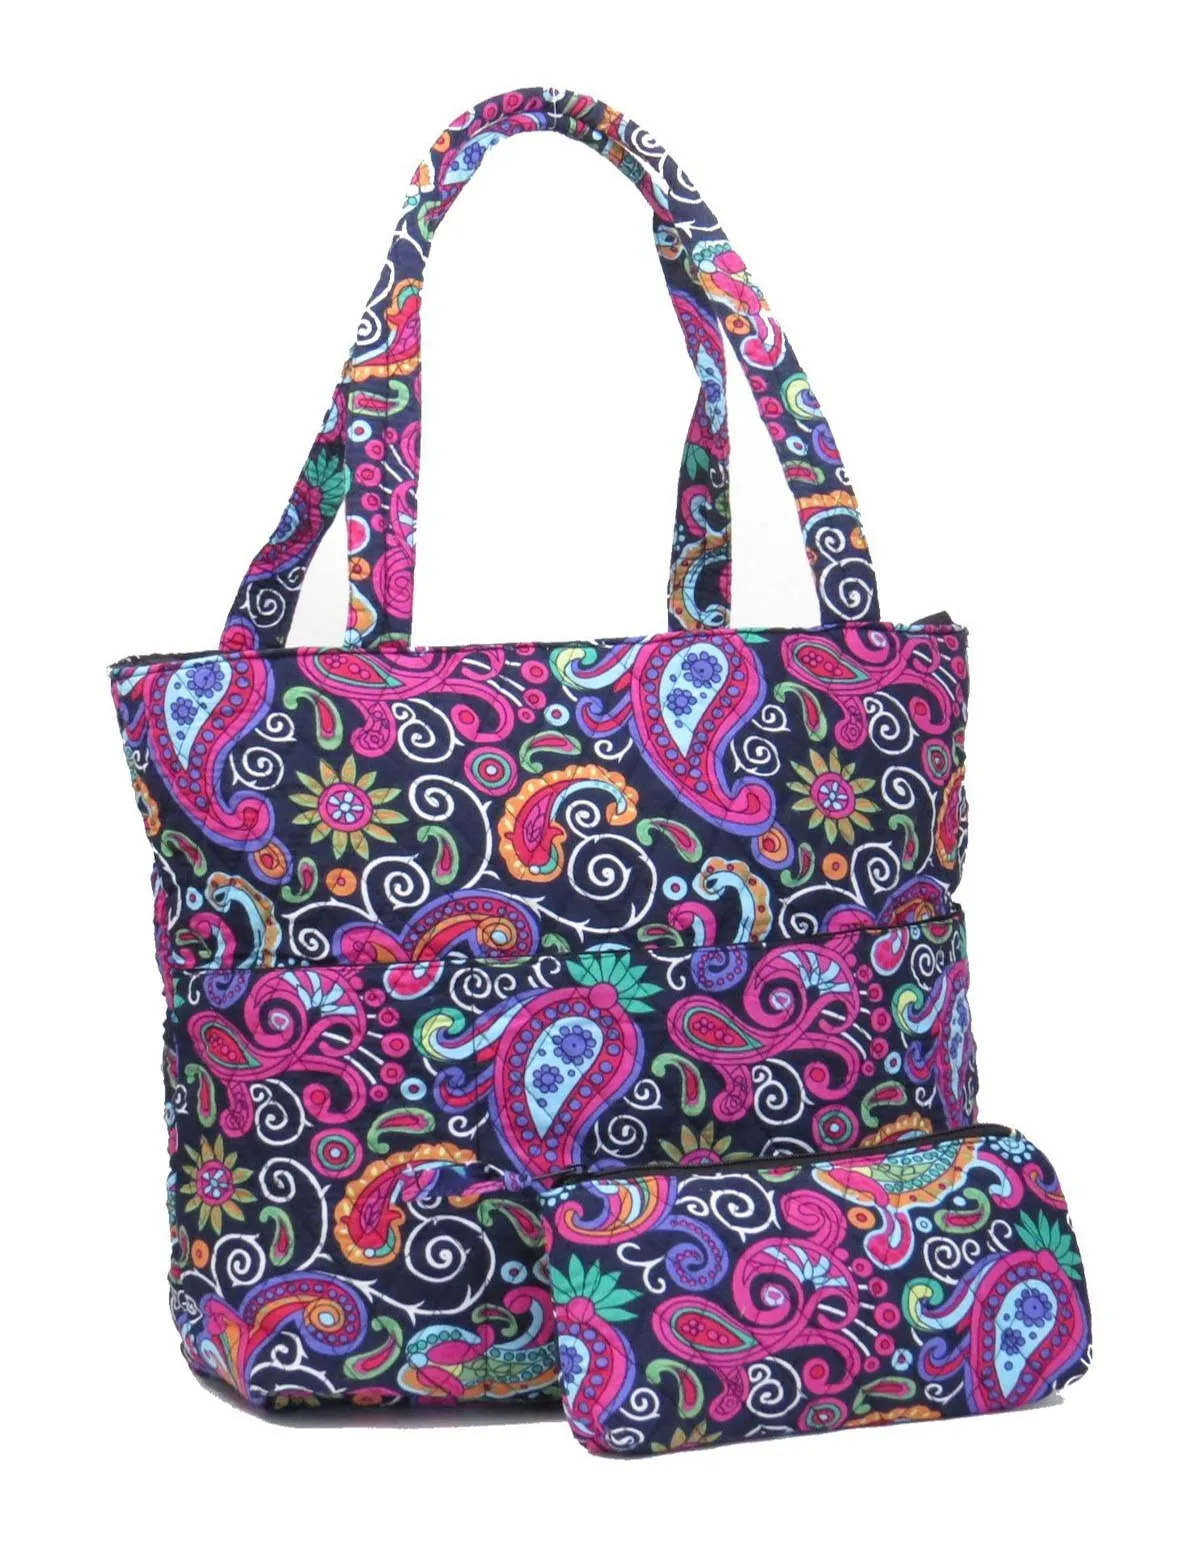 2pc Monogrammed Paisley Pattern Quilted Tote Bag Set With Make Up Bag ...